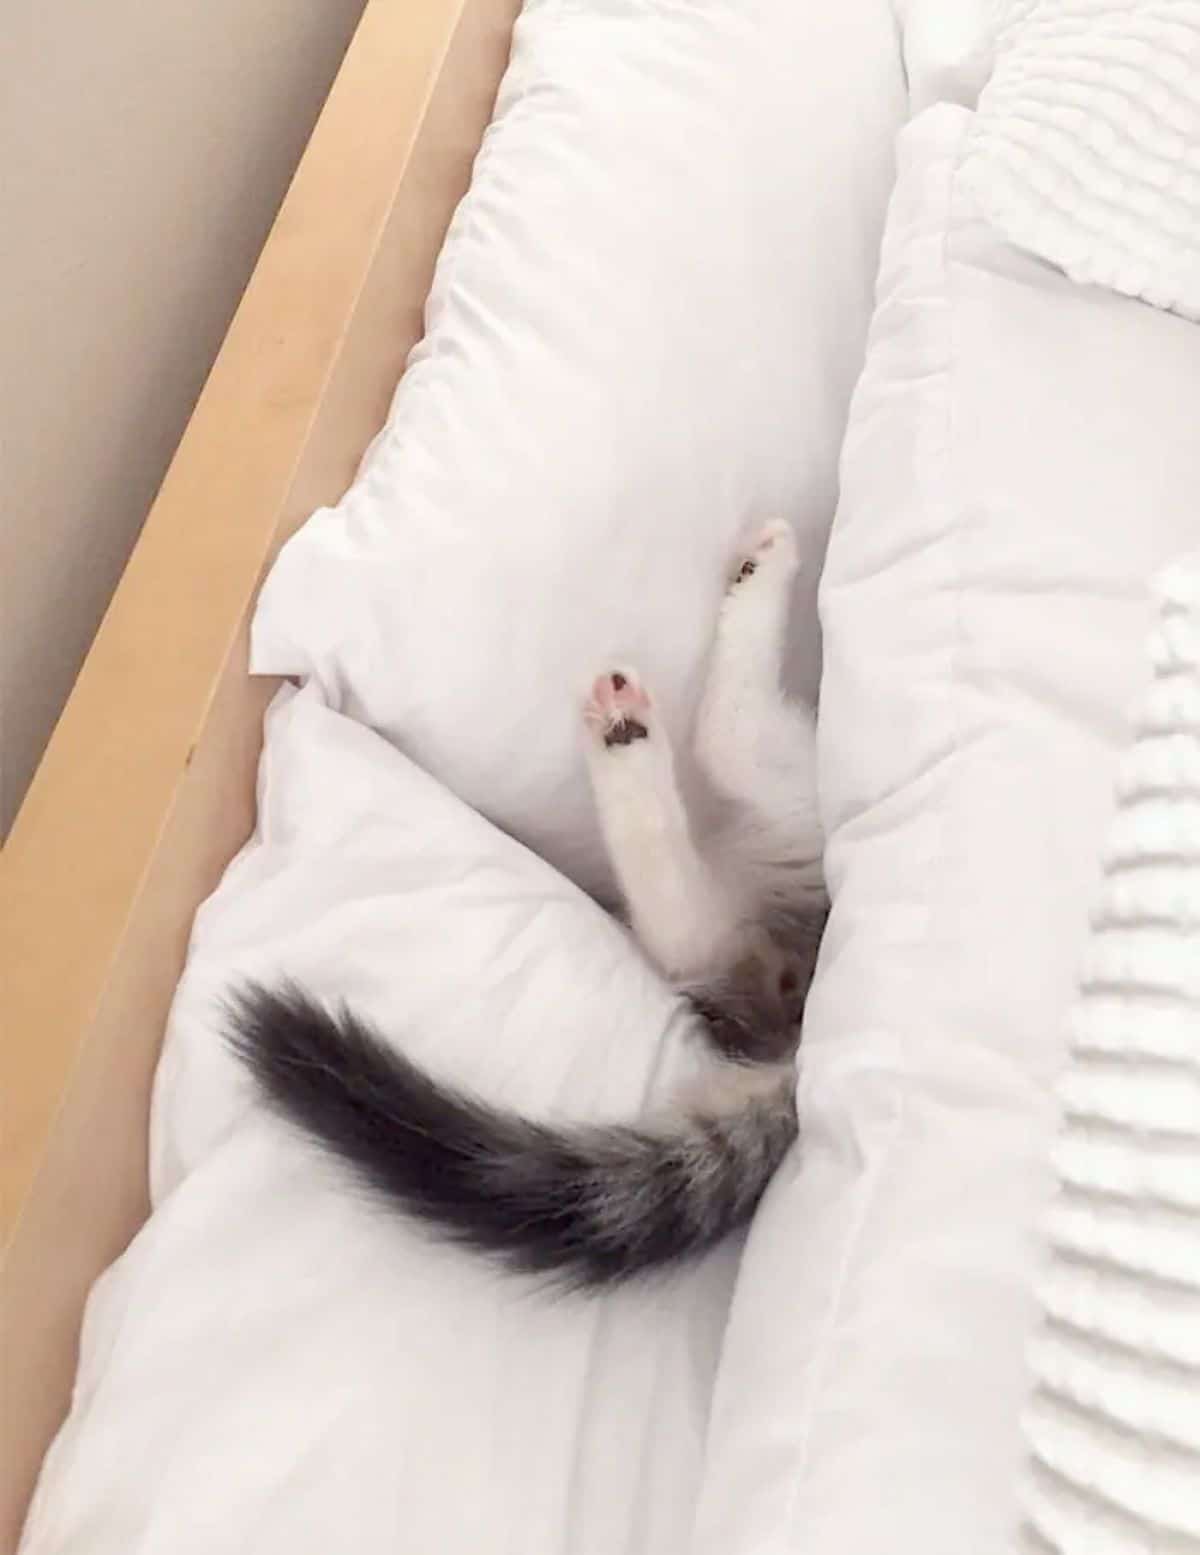 grey and white tabby cat's back legs and tail sticking out from under a white blanket by 2 white pillows